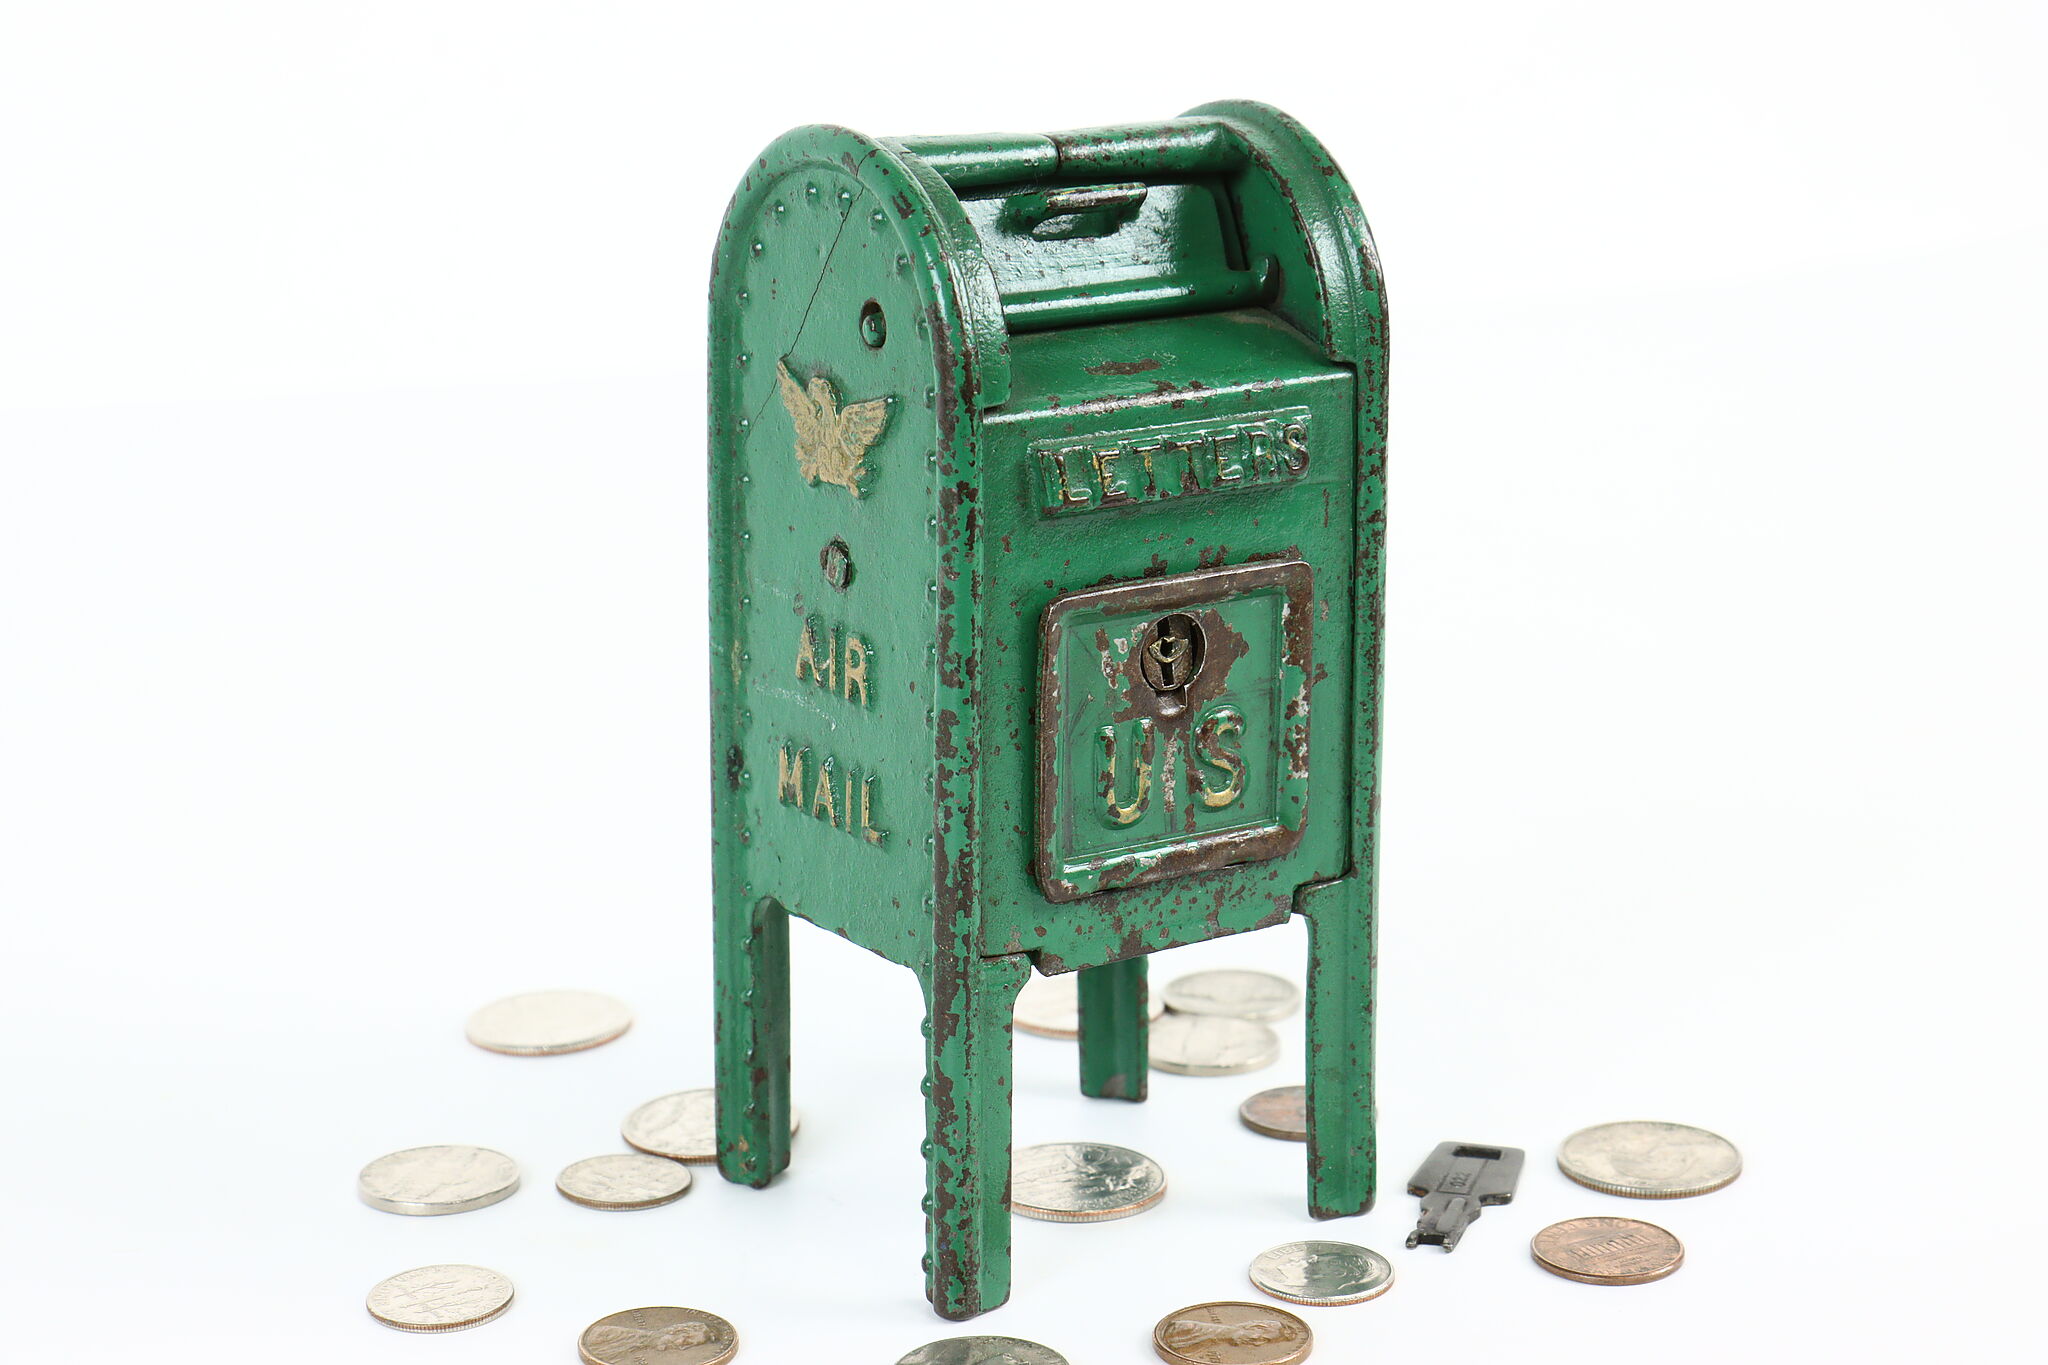 FREE SHIPPING VINTAGE MAILBOX COIN BANK WITH LOCK & KEY NEW IN THE BOX,USA 